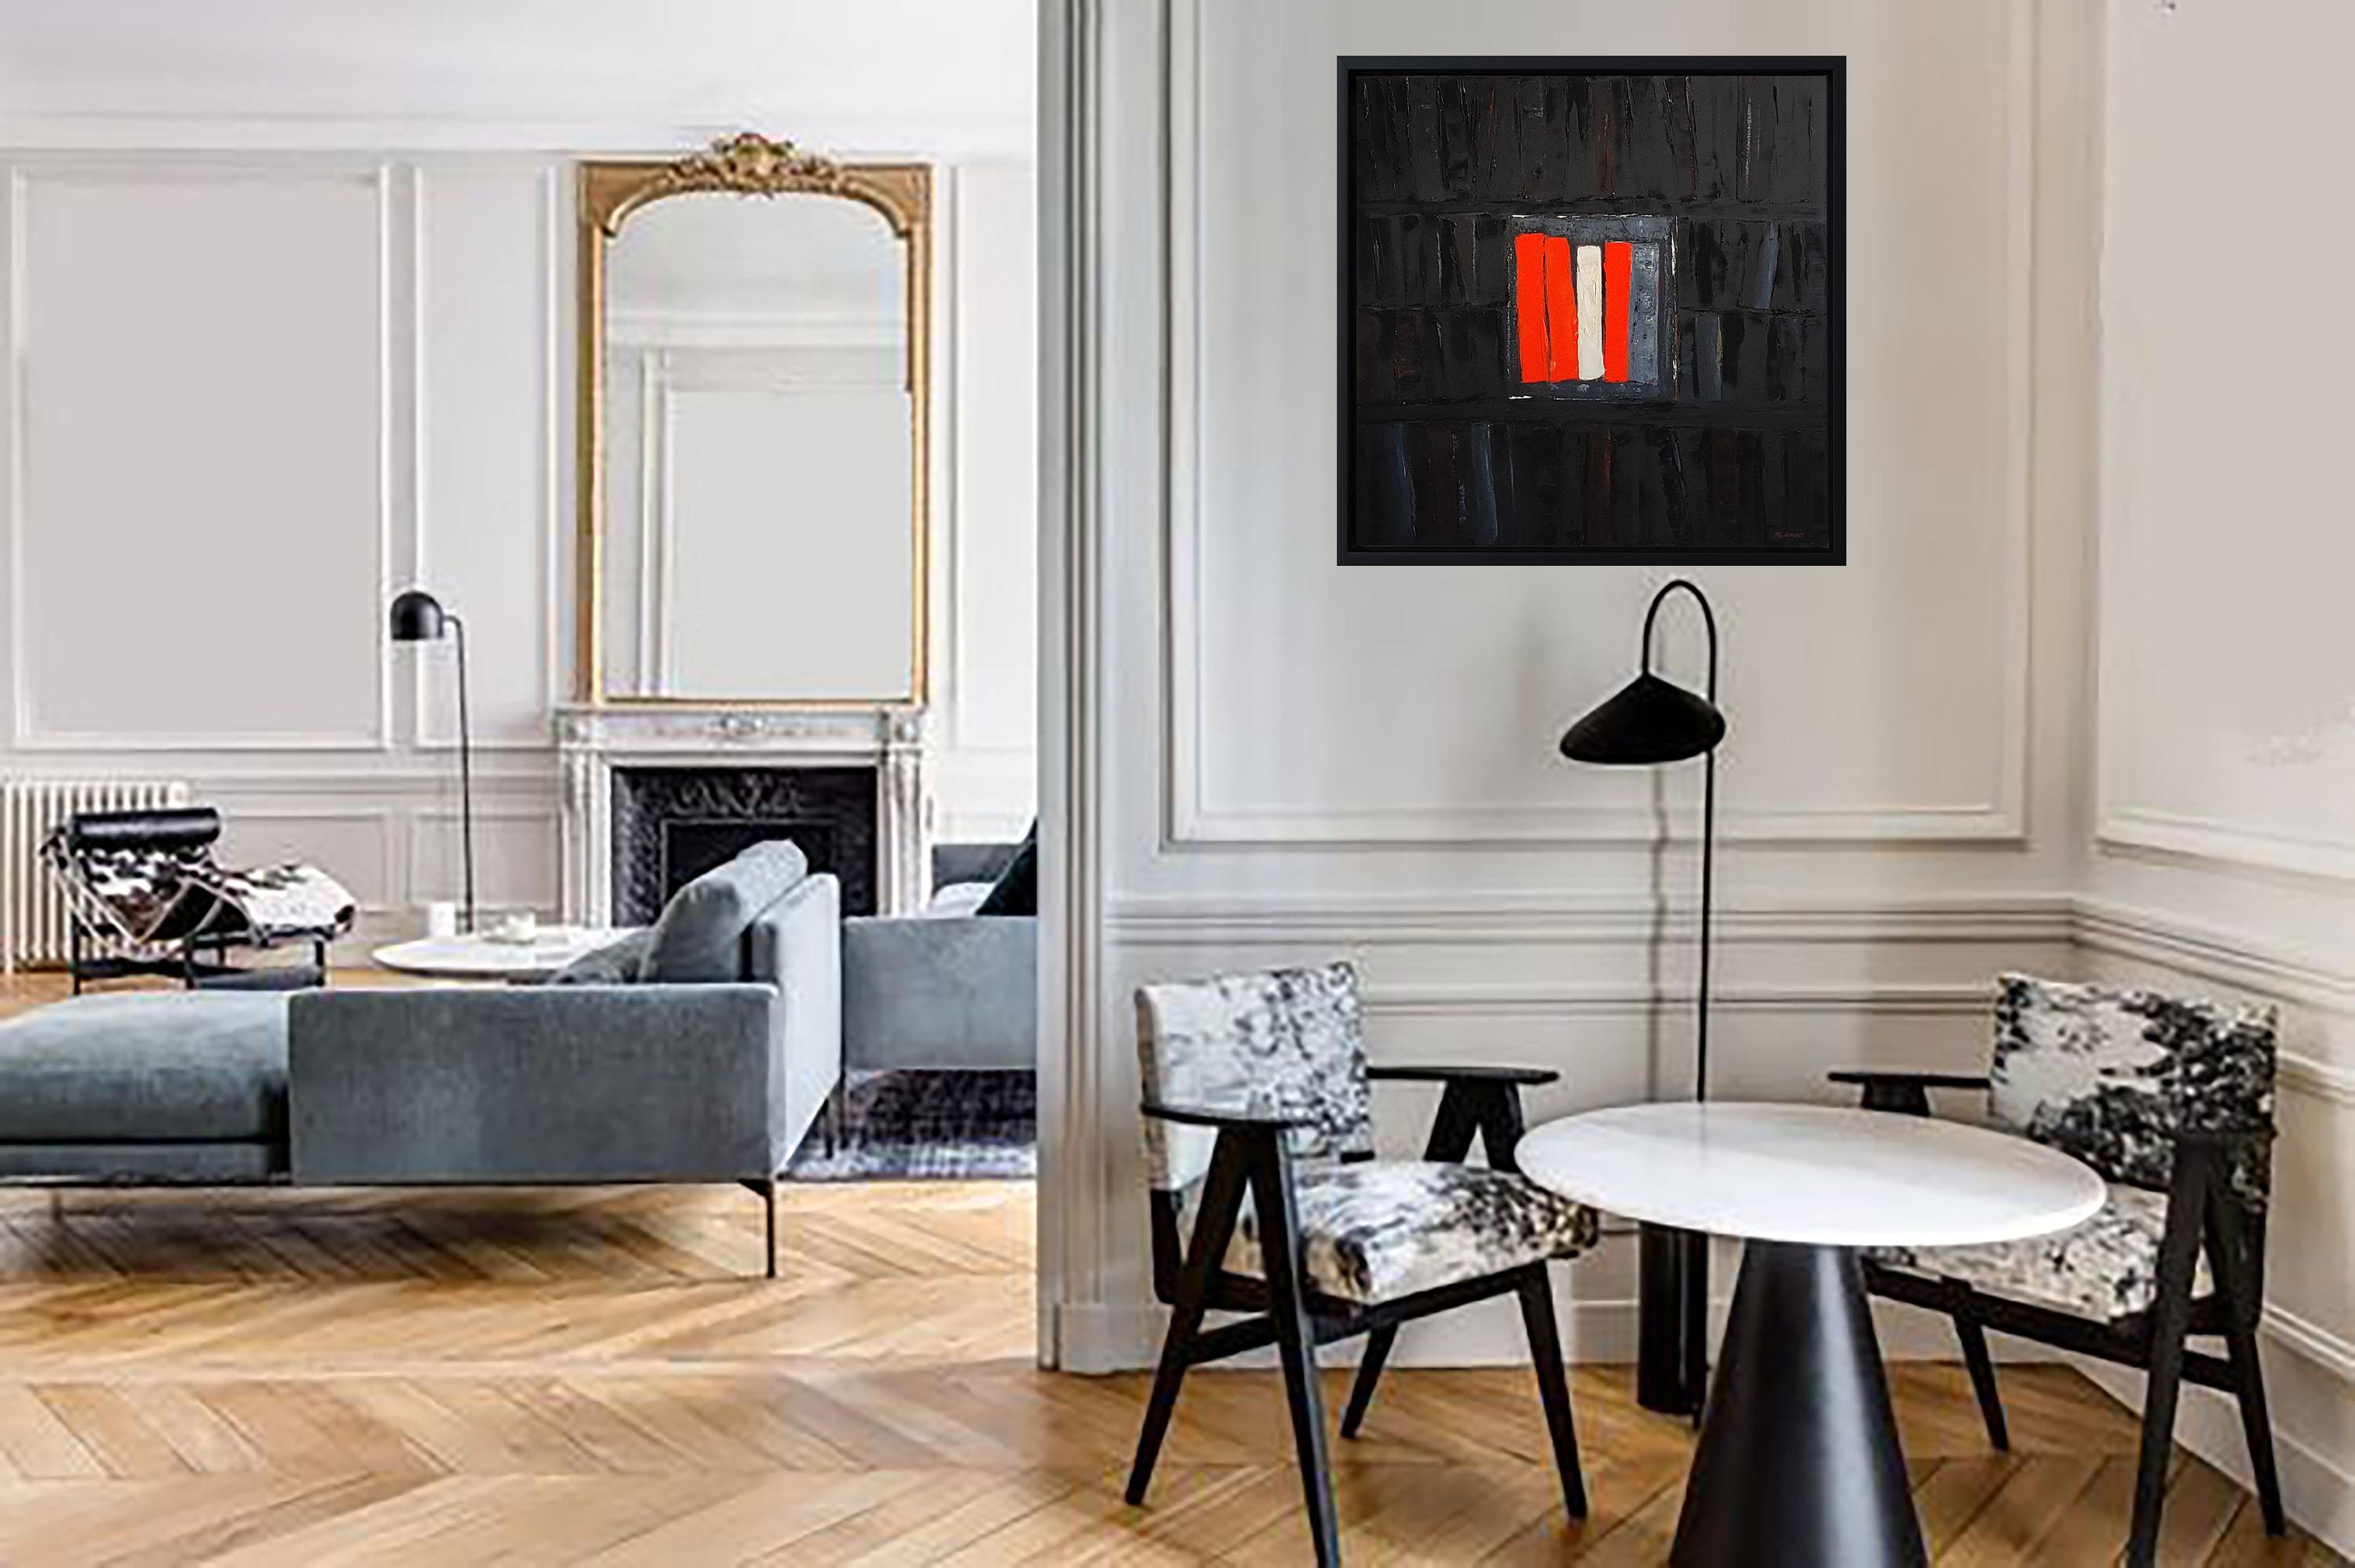 passion litteraire, oil, black red abstract; library, contempory art, minimalism - Painting by SOPHIE DUMONT